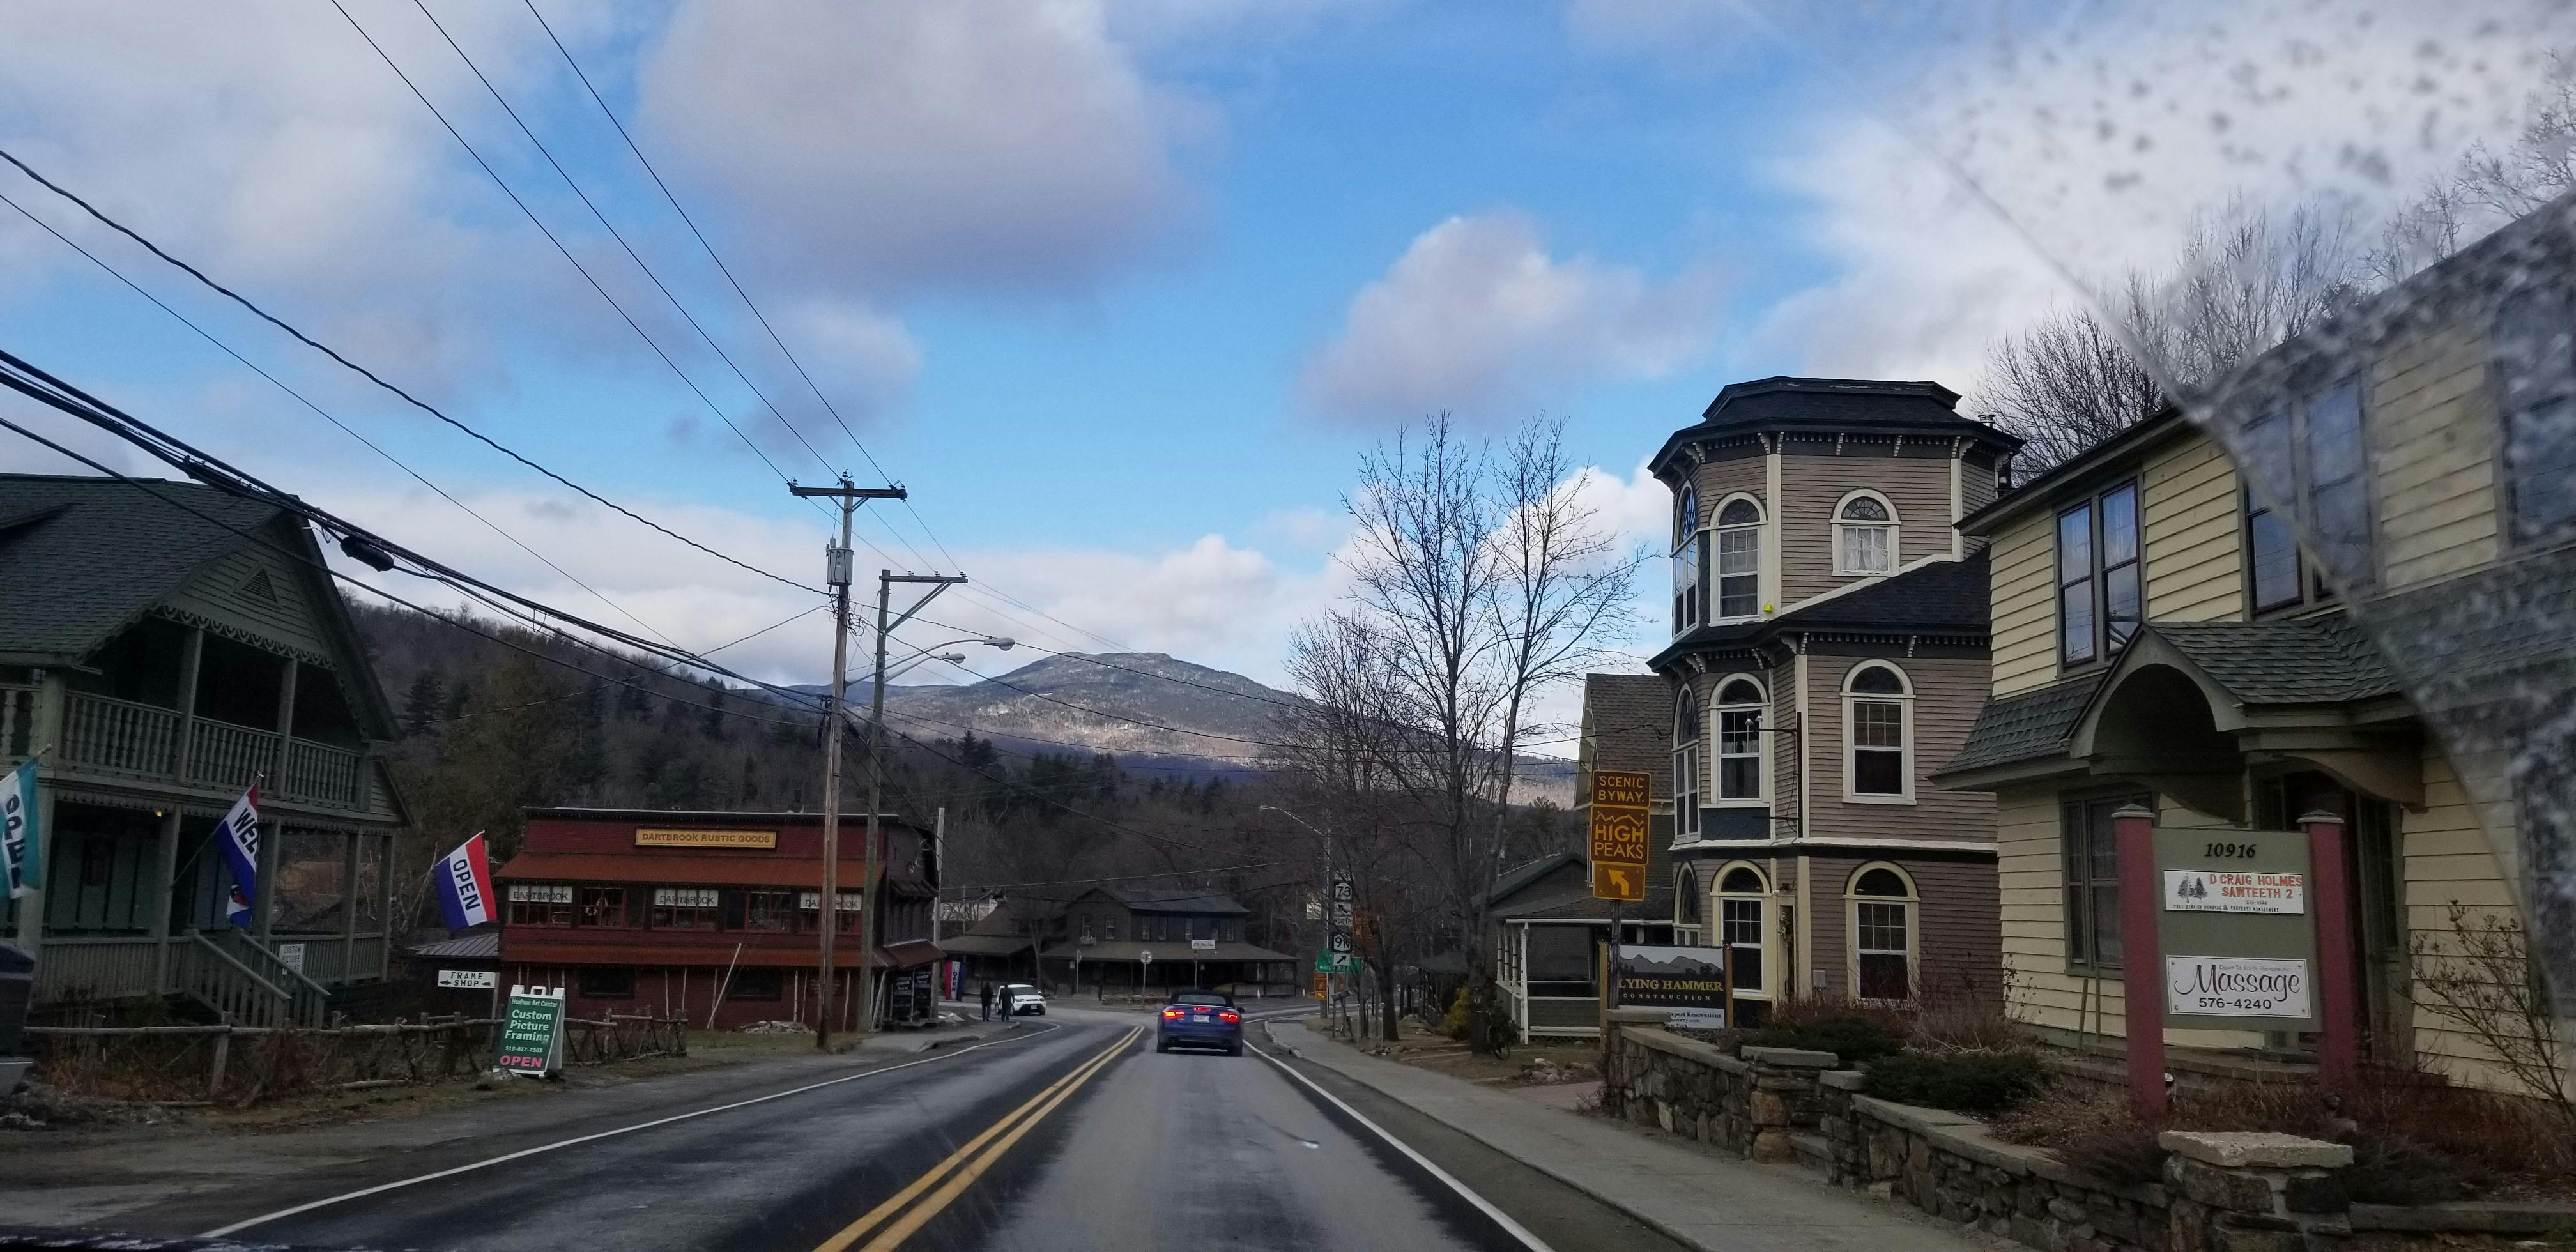 Free stock photo of adirondack mountains, car perspective, country town